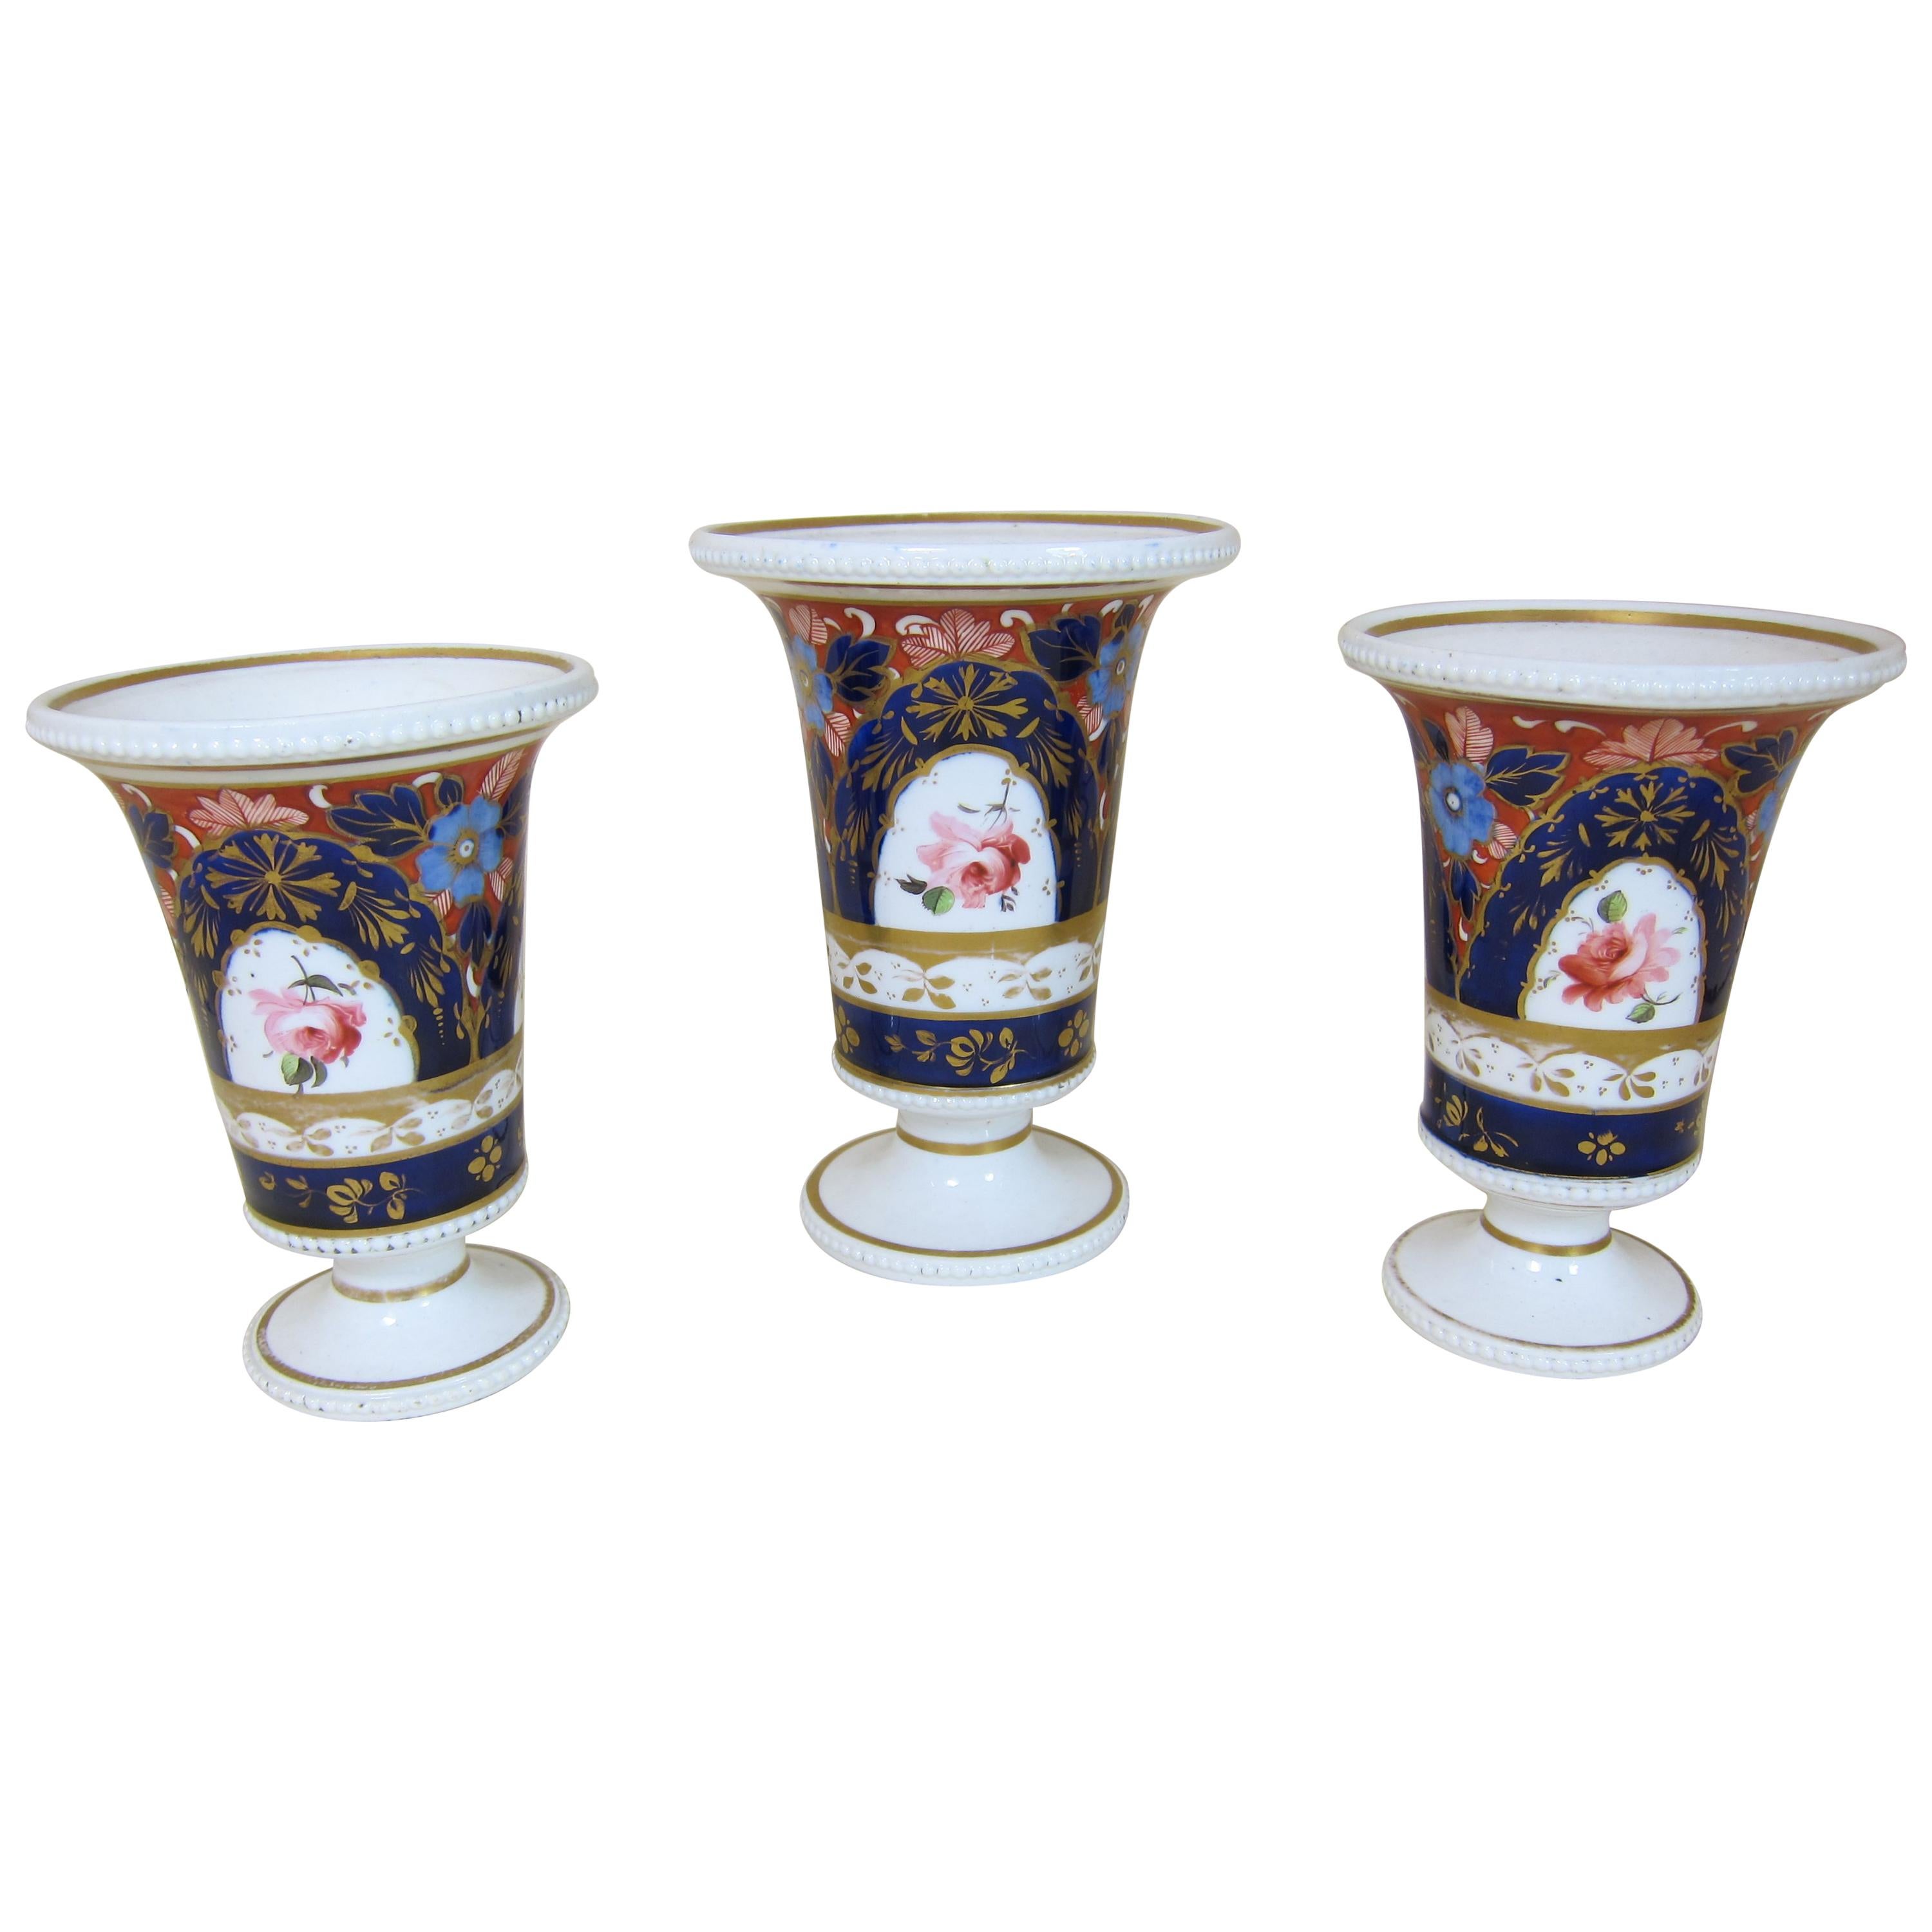 Garniture of 3 Spode Porcelain Vases Decorated with Blue Ground and Roses For Sale